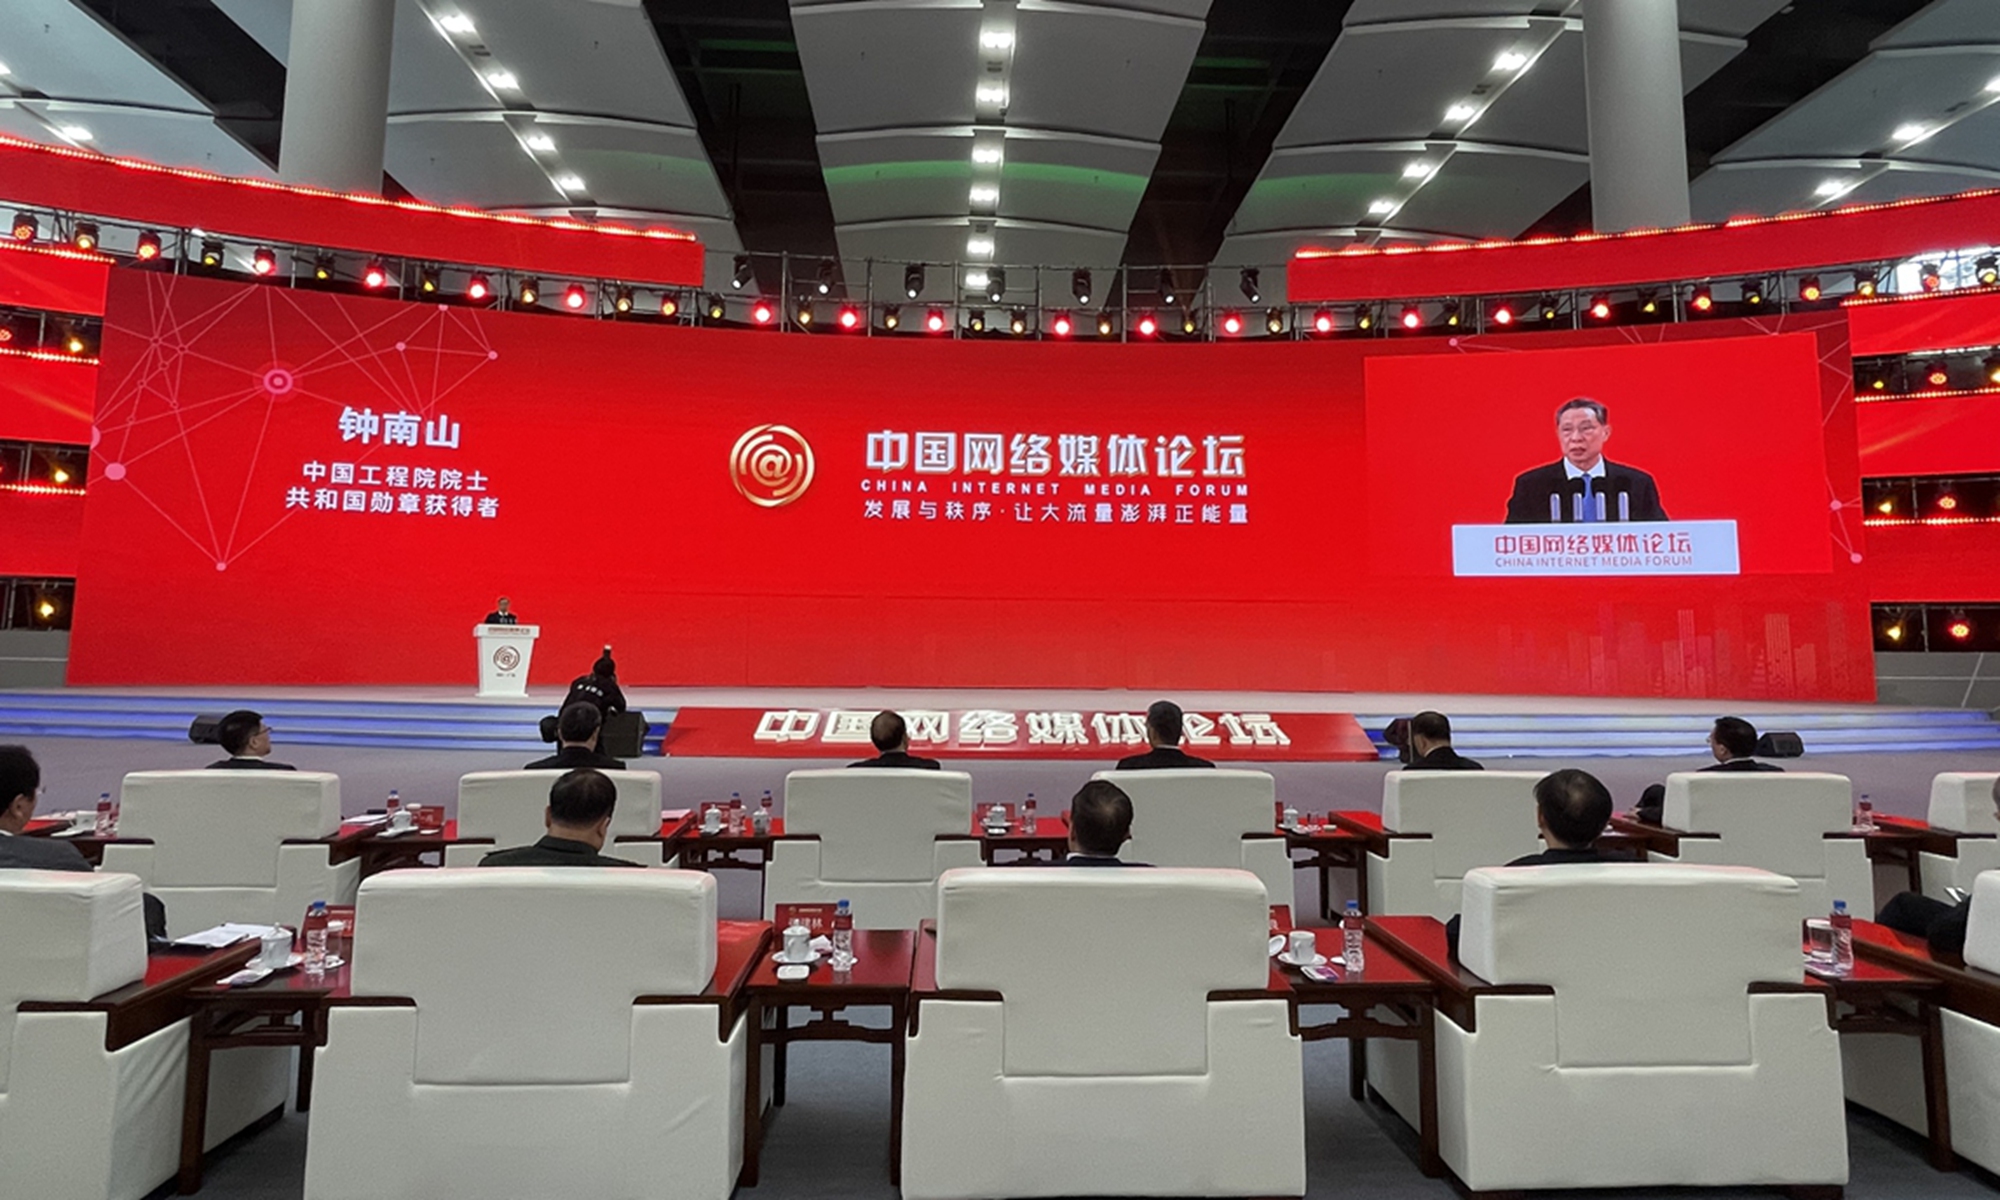 China's top respiratory expert Zhong Nanshan speaks at the opening ceremony of the China Internet Media Forum in Guangzhou, South China's Guangdong Province on November 25, 2021. Photo: Cao Siqi/Global Times